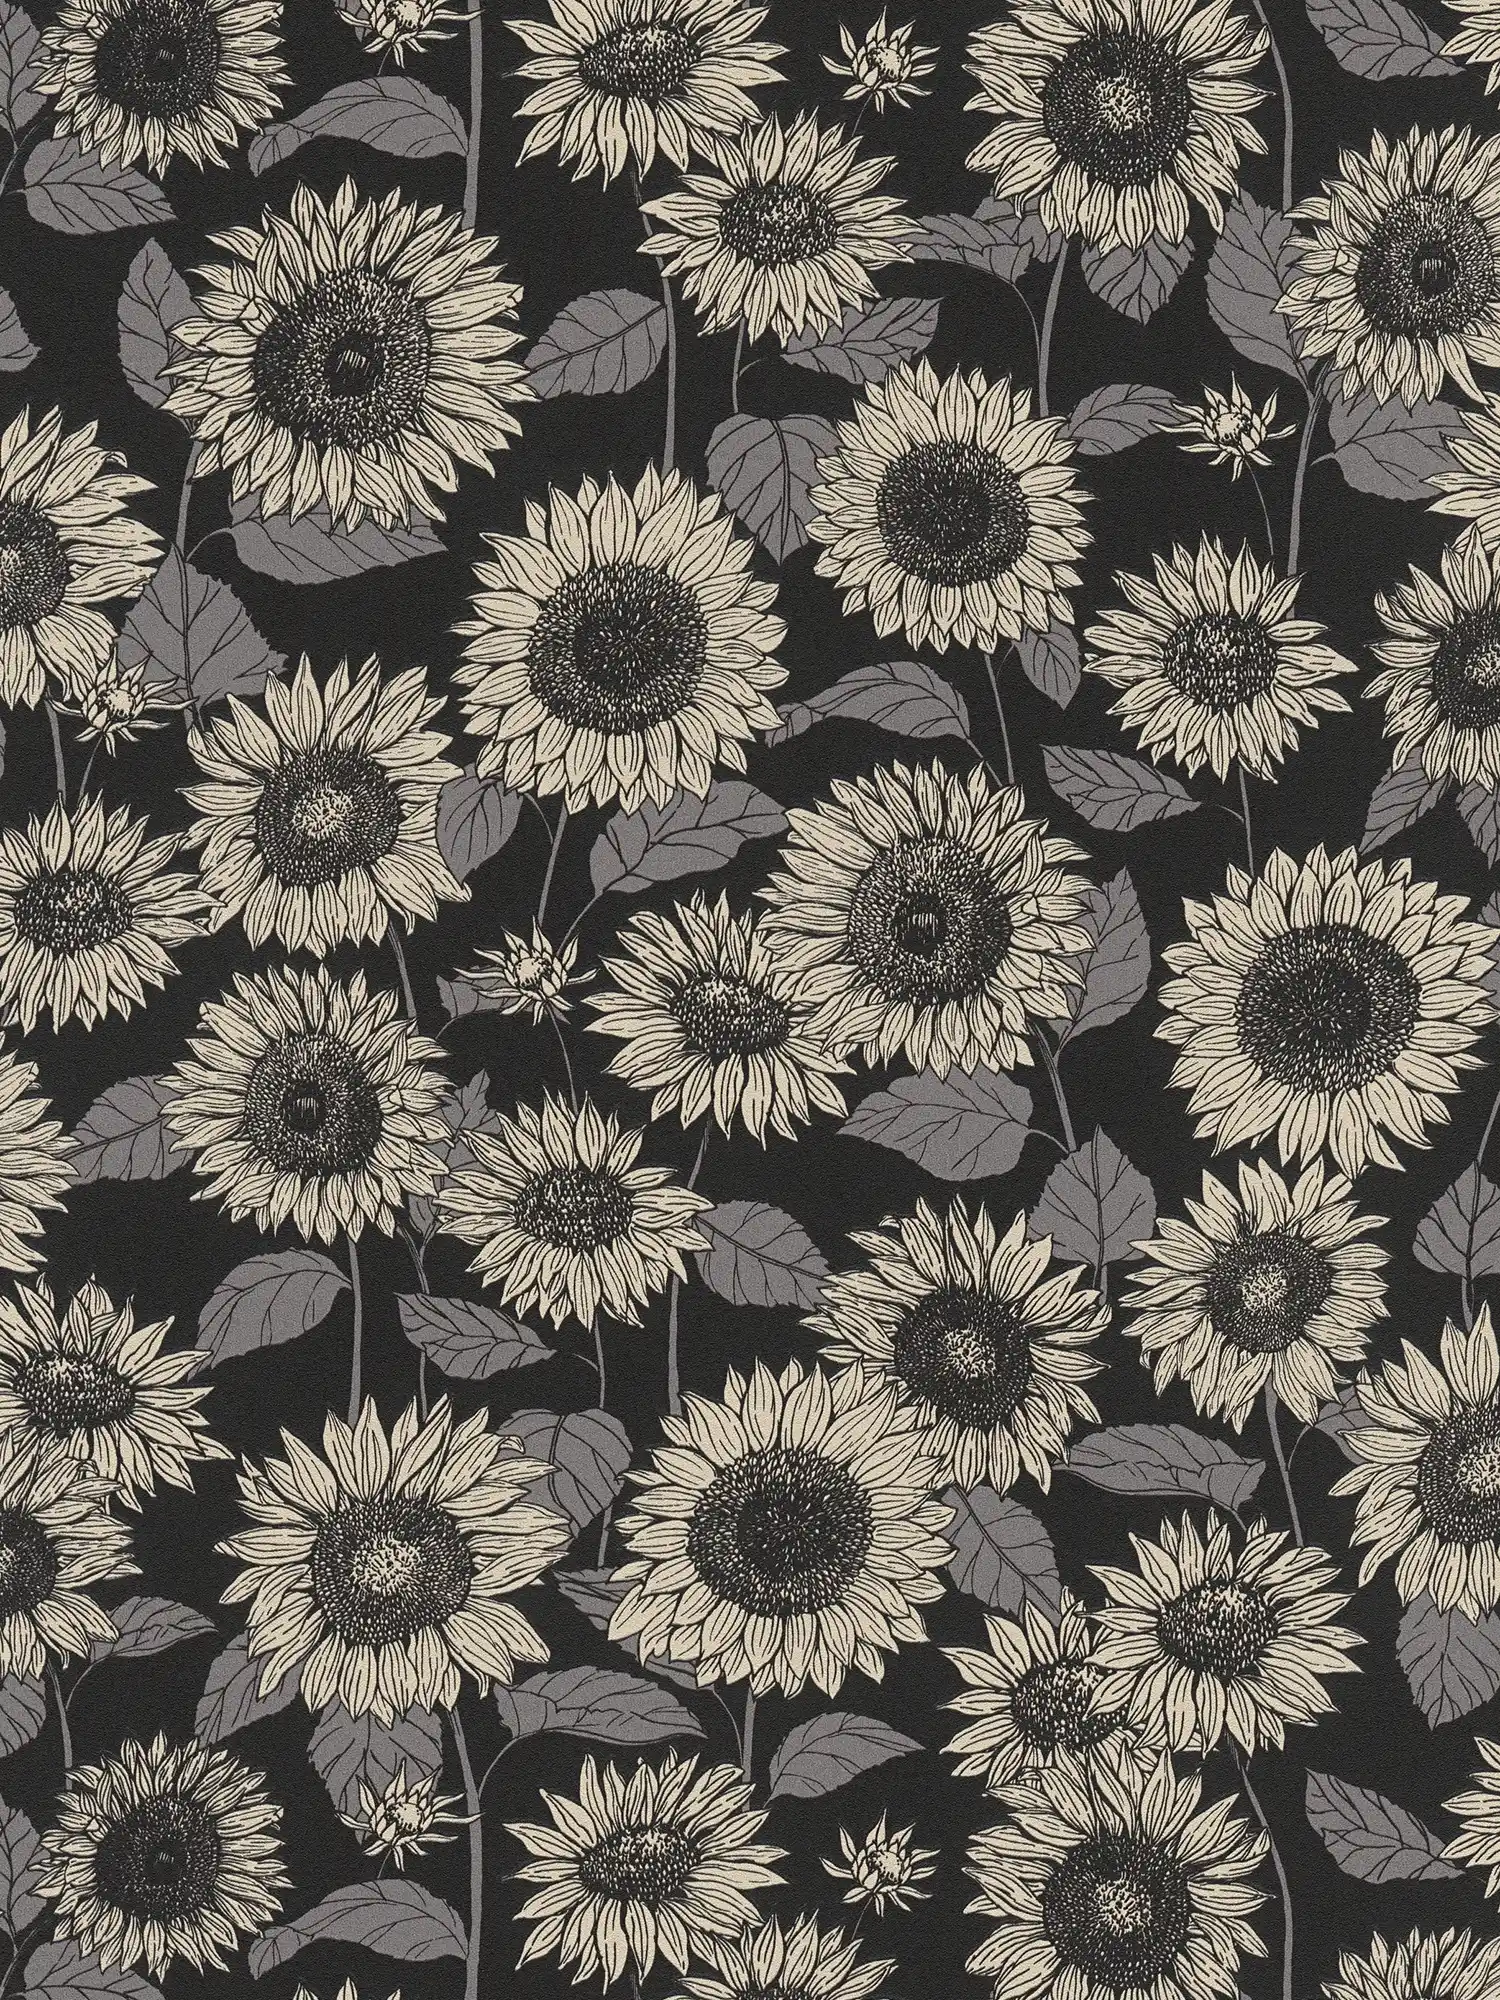 Sunflower wallpaper with metallic effect flowers - black, anthracite, grey
